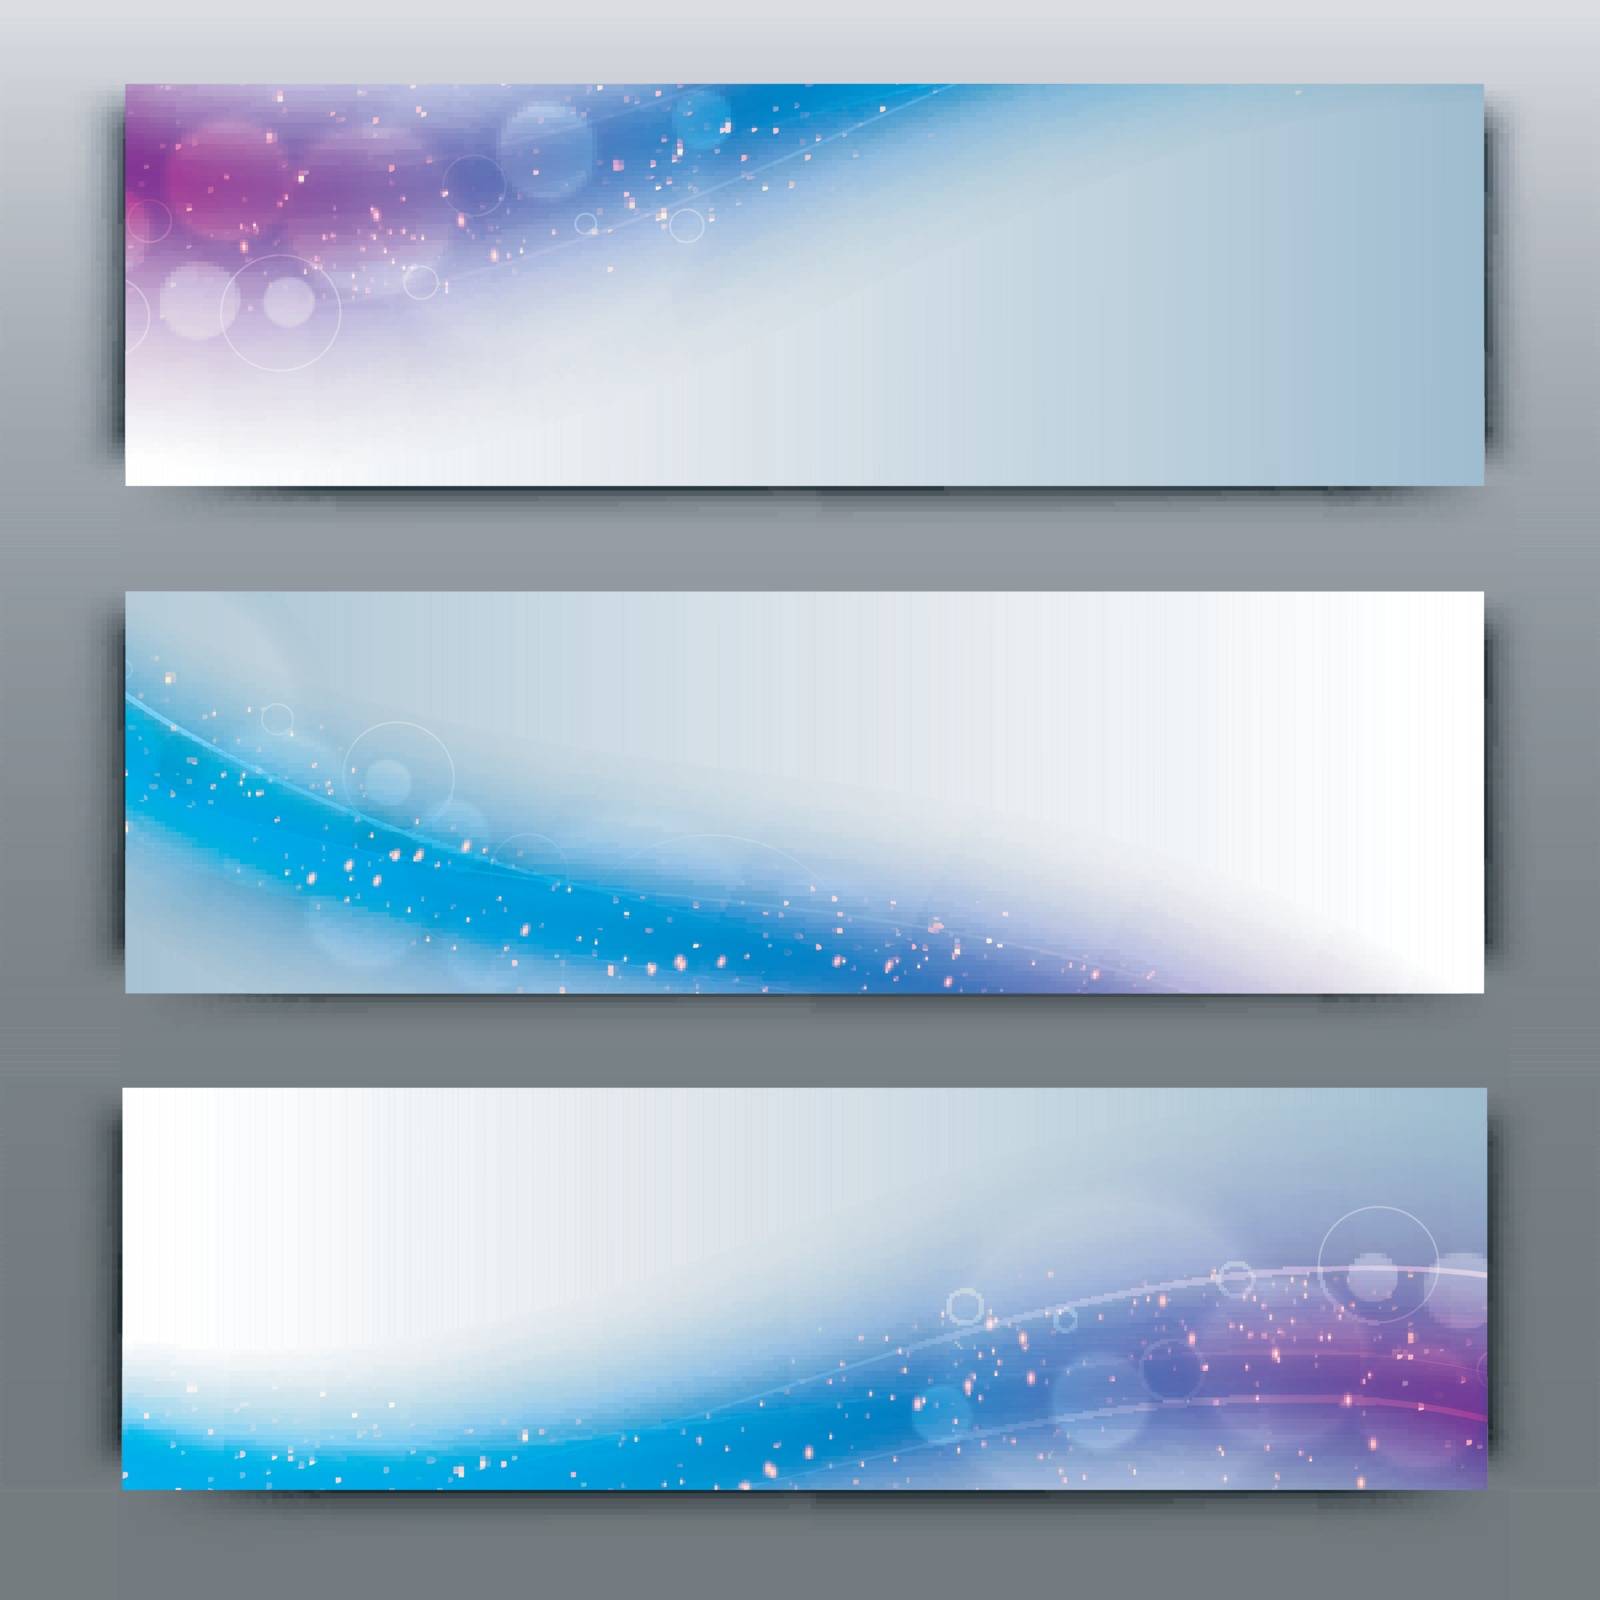 Website headers or banners with creative glowing waves effect.